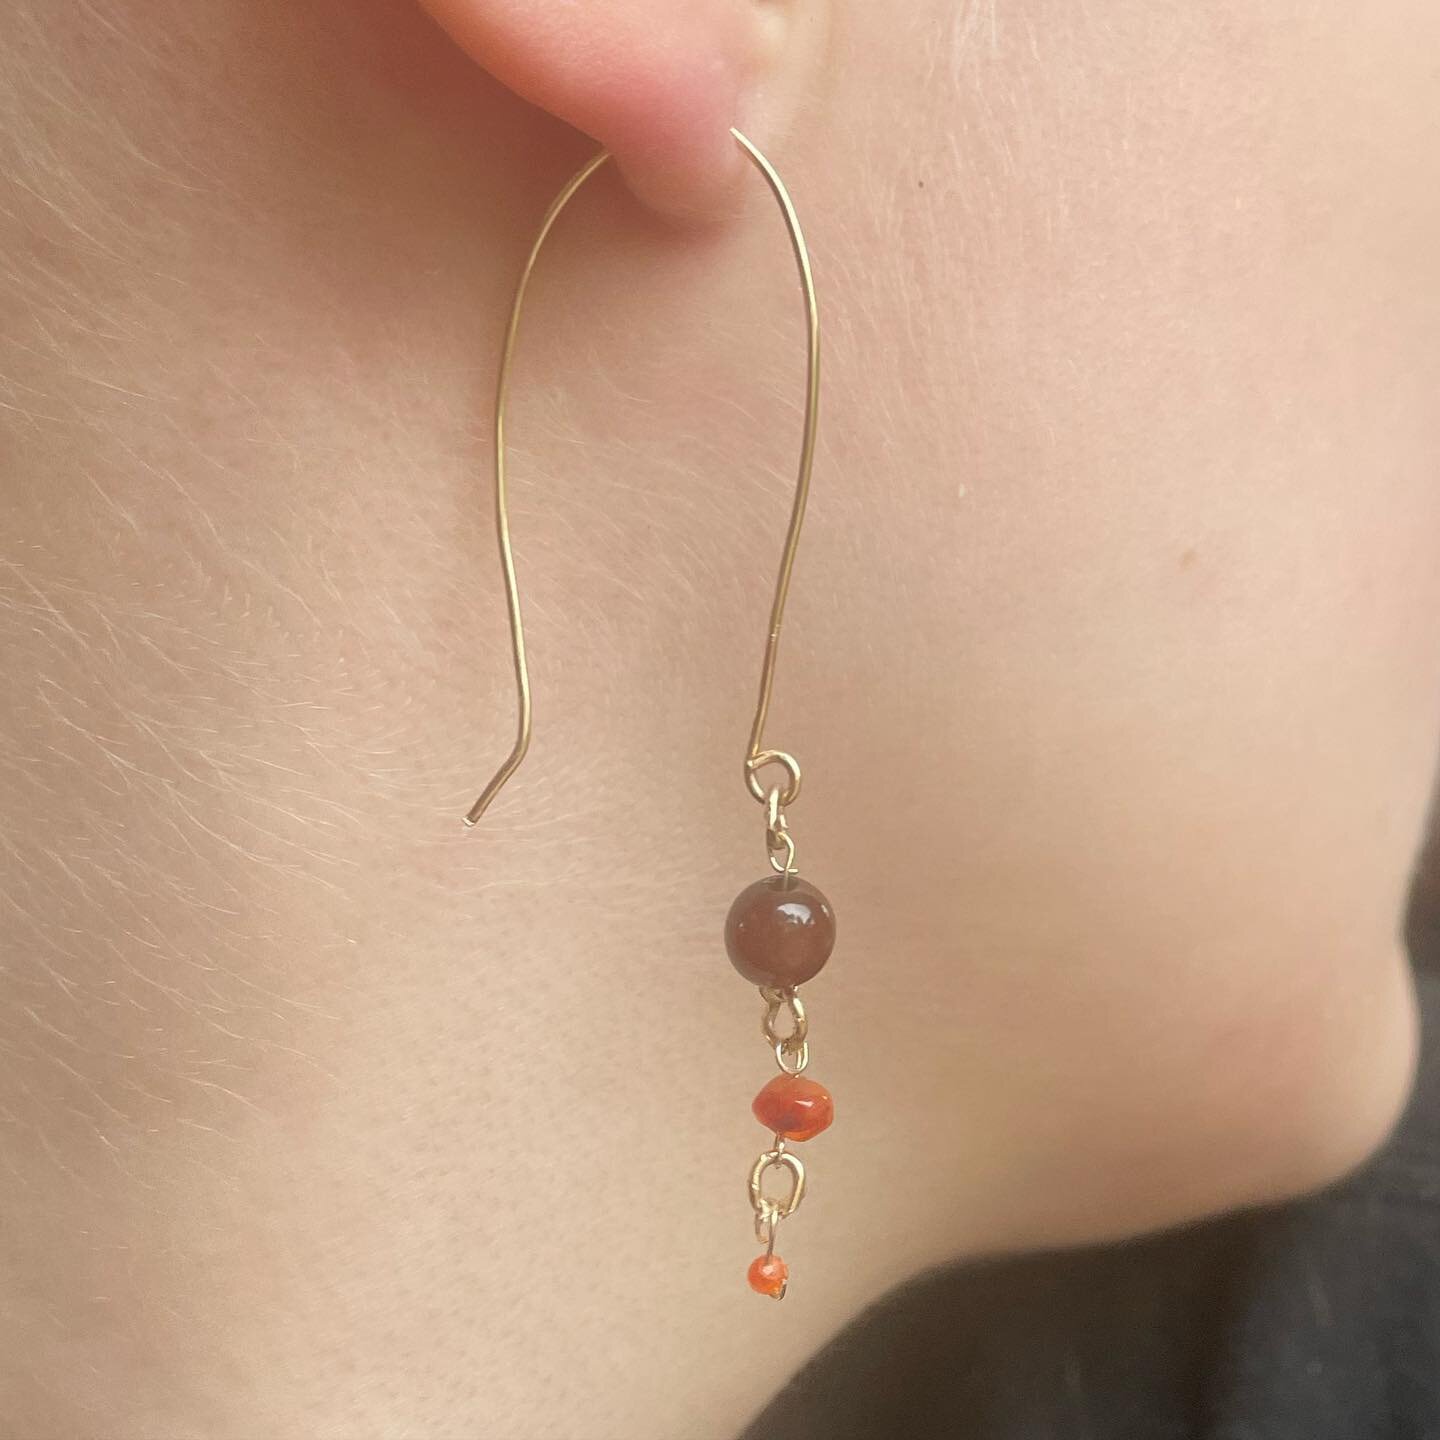 The Chocolate Earrings ✨
Vintage carnelian and fire opal beads on gold fill wire ✨

#handmadejewellery #jewellery #smallbusiness #historicallyinspired #crystaljewellery #recycledjewellery #recycledbrass #recycledmaterials #vintagematerials  #jewelryf